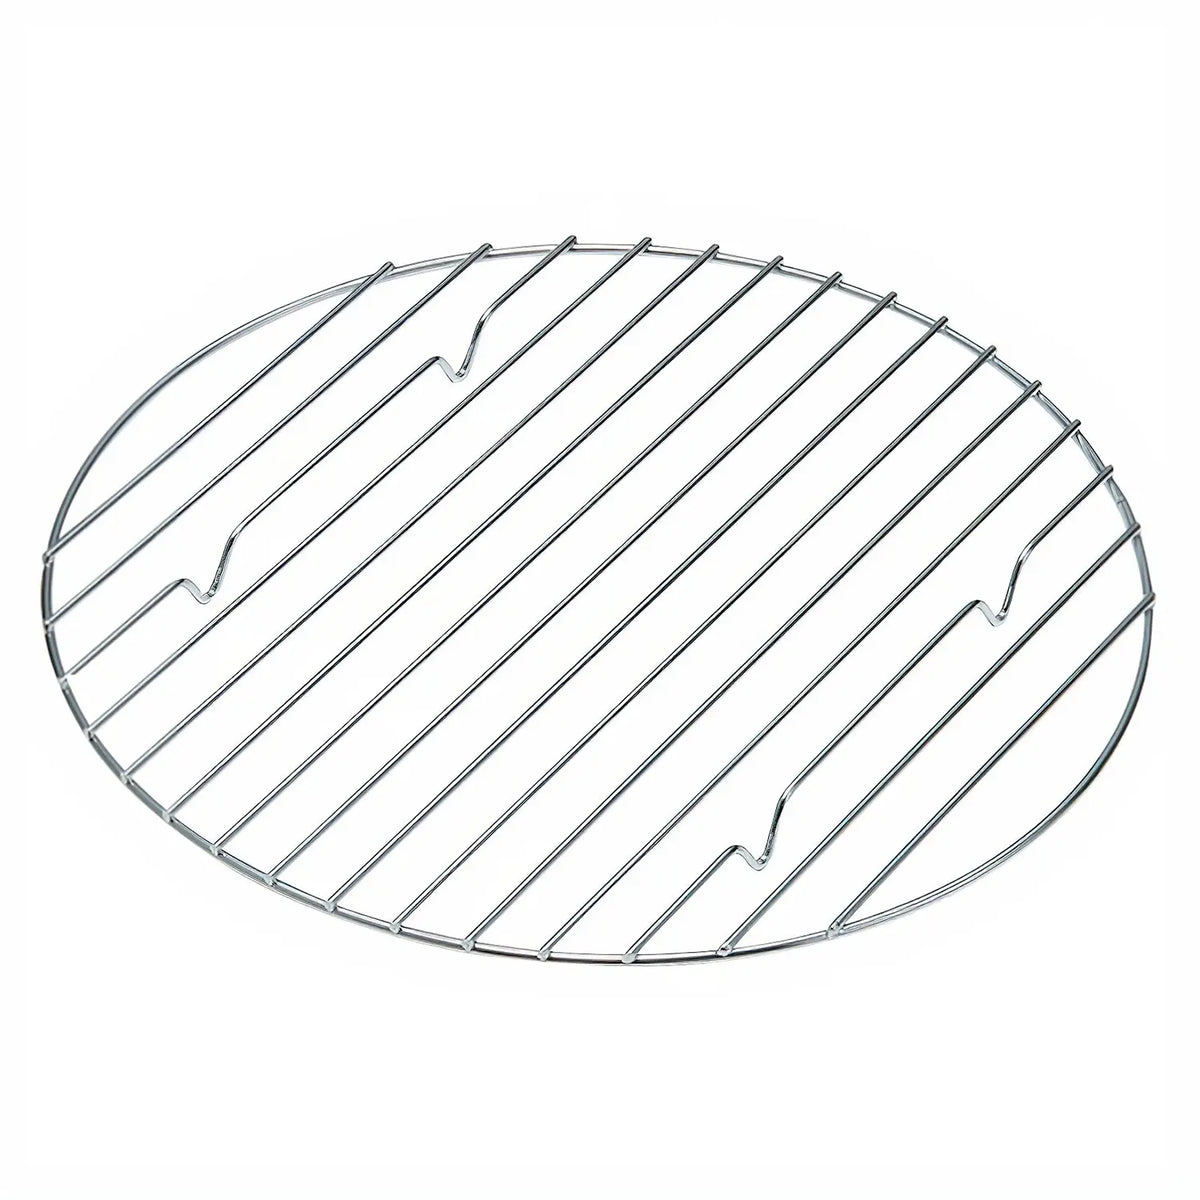 TIGERCROWN Cake Land Steel Round Cake Cooling Rack with Feet